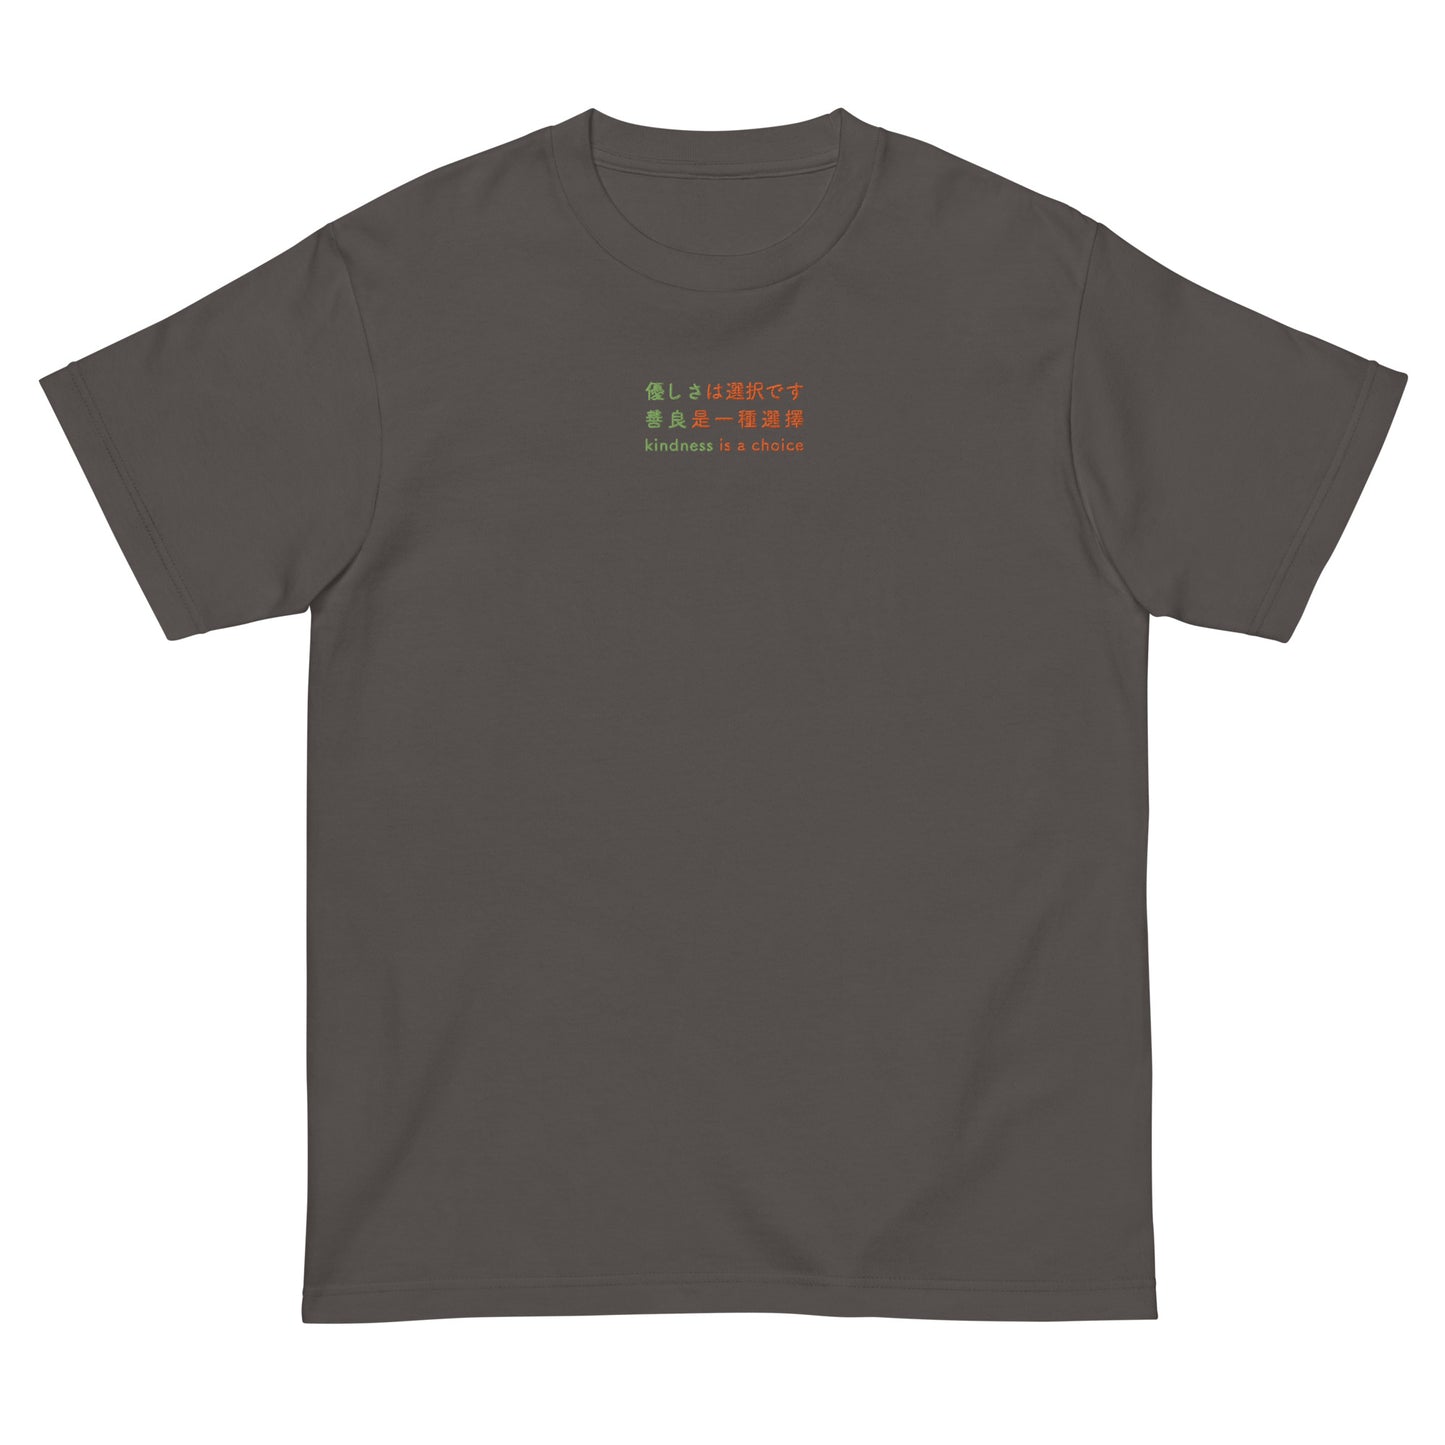 Dark Gray High Quality Tee - Front Design with an Green, Orange Embroidery "Kindness is a Choice" in Japanese,Chinese and English